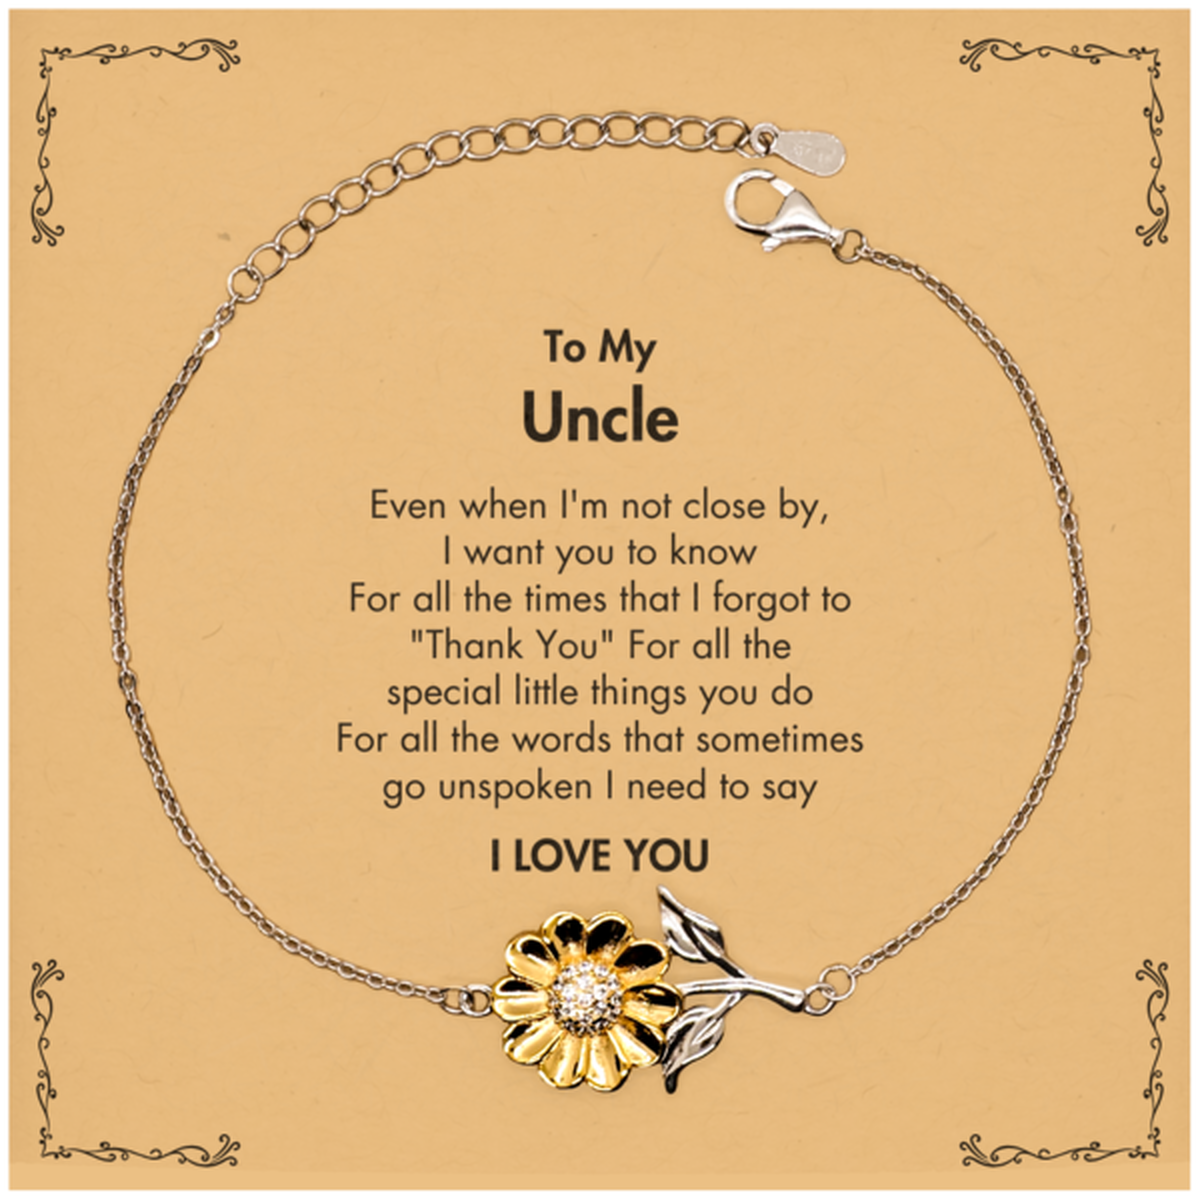 Thank You Gifts for Uncle, Keepsake Sunflower Bracelet Gifts for Uncle Birthday Mother's day Father's Day Uncle For all the words That sometimes go unspoken I need to say I LOVE YOU